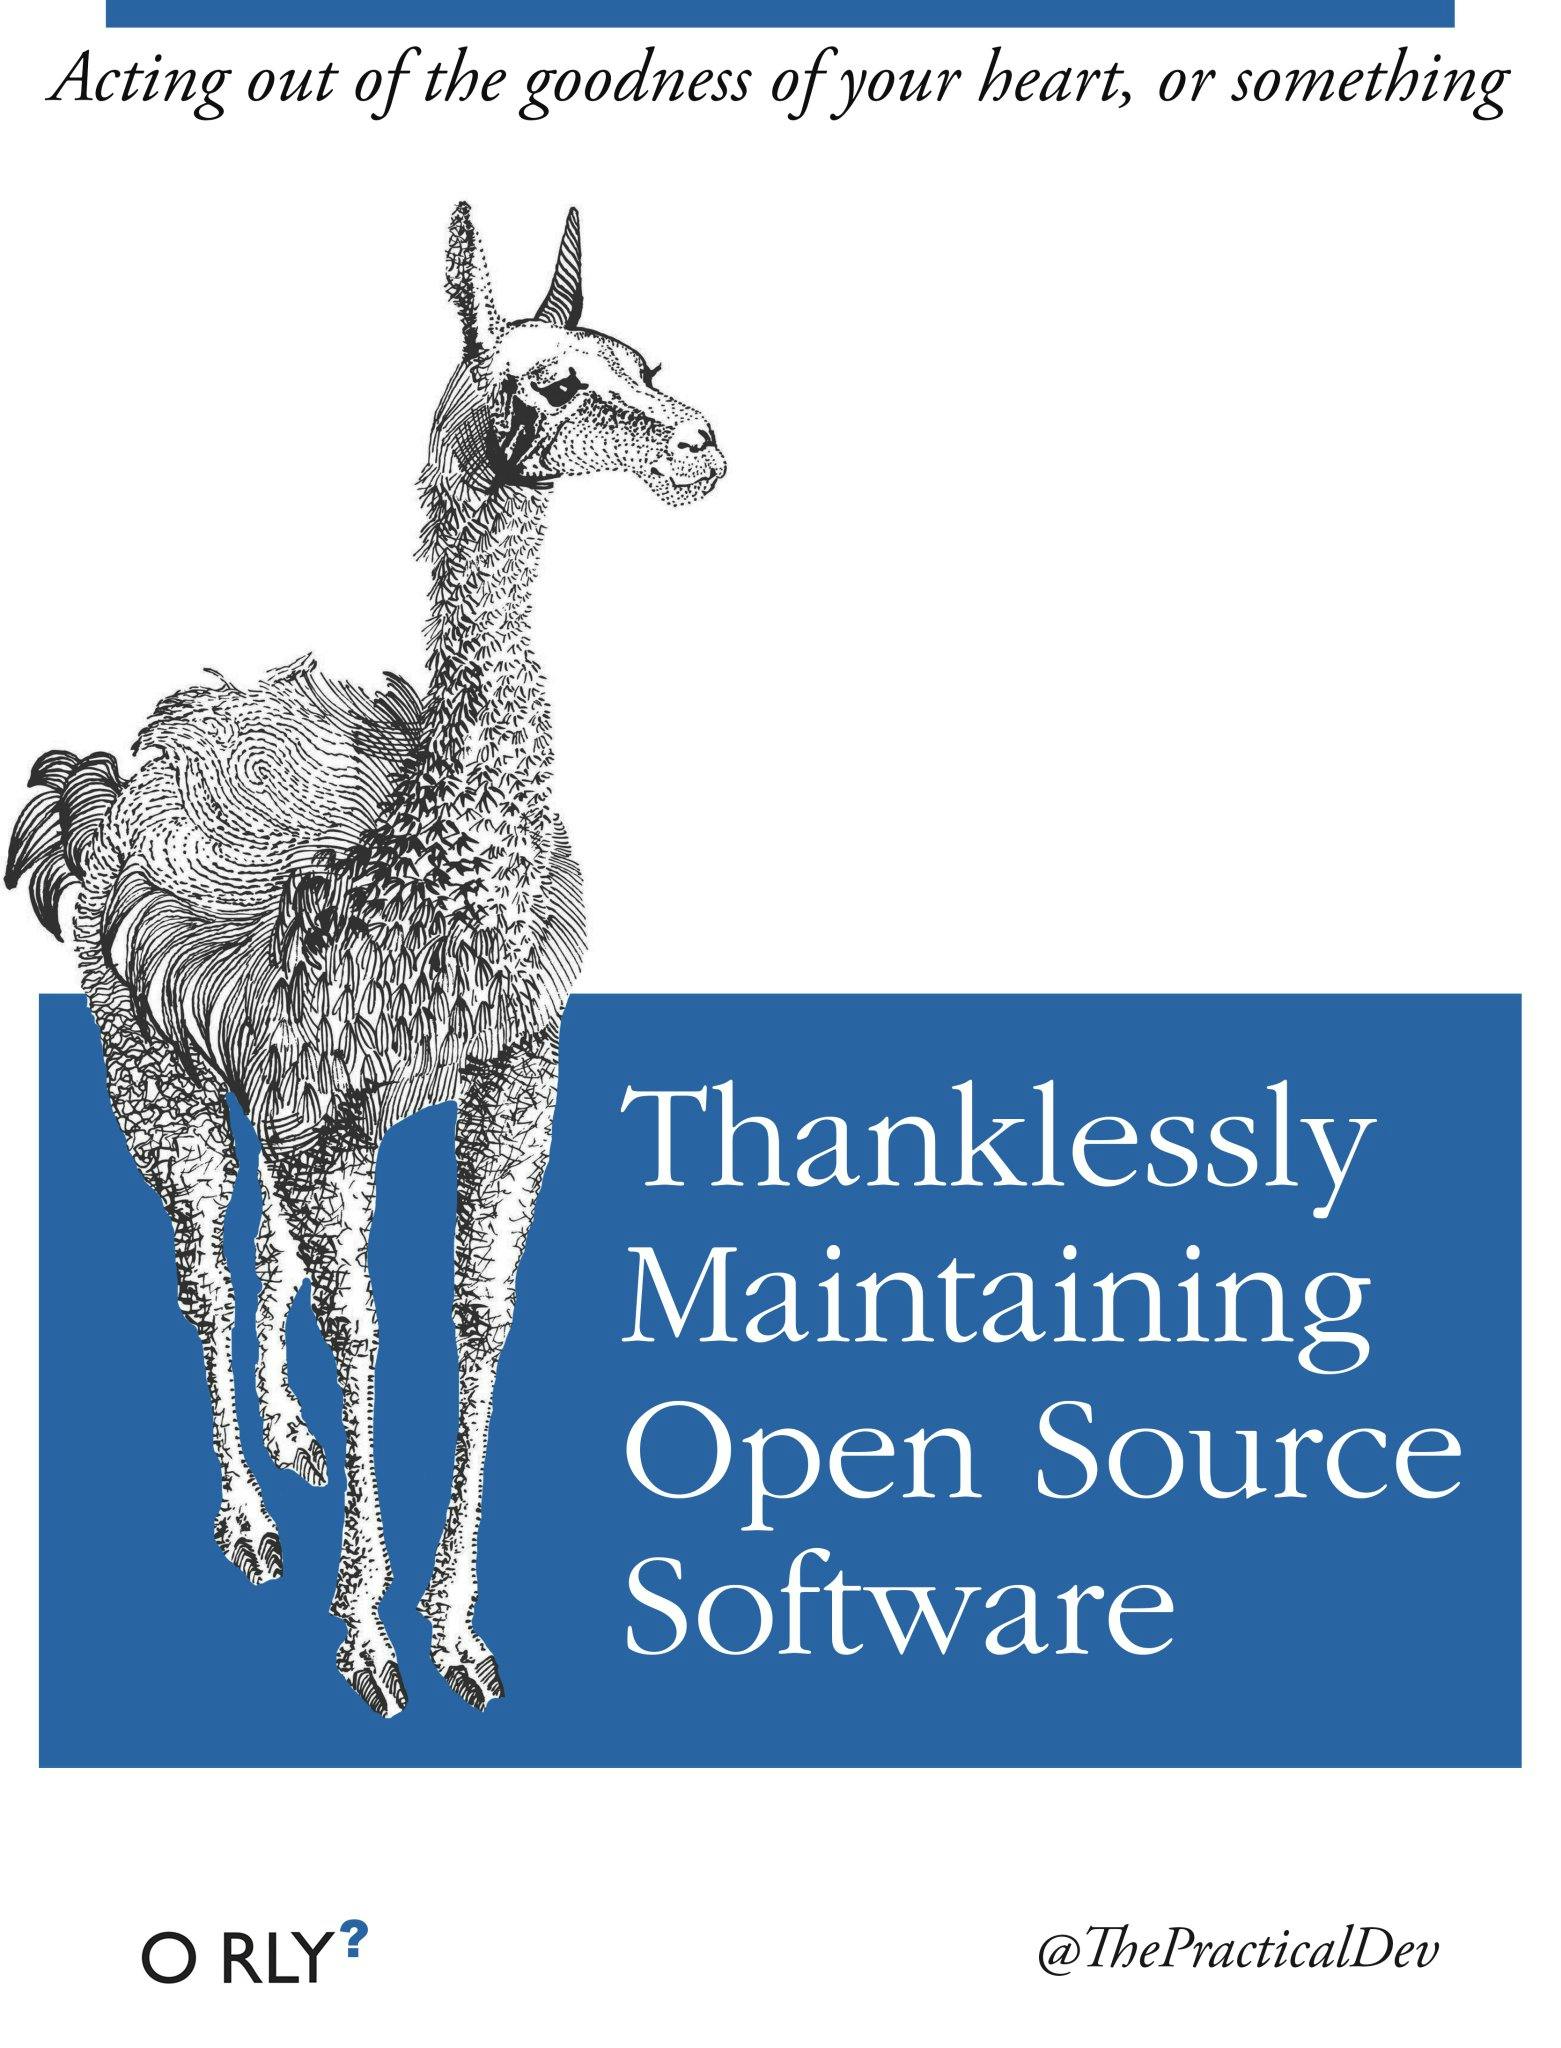 Thanklessly Maintaining Open Source Software | Acting out of the goodness of your heart, or something